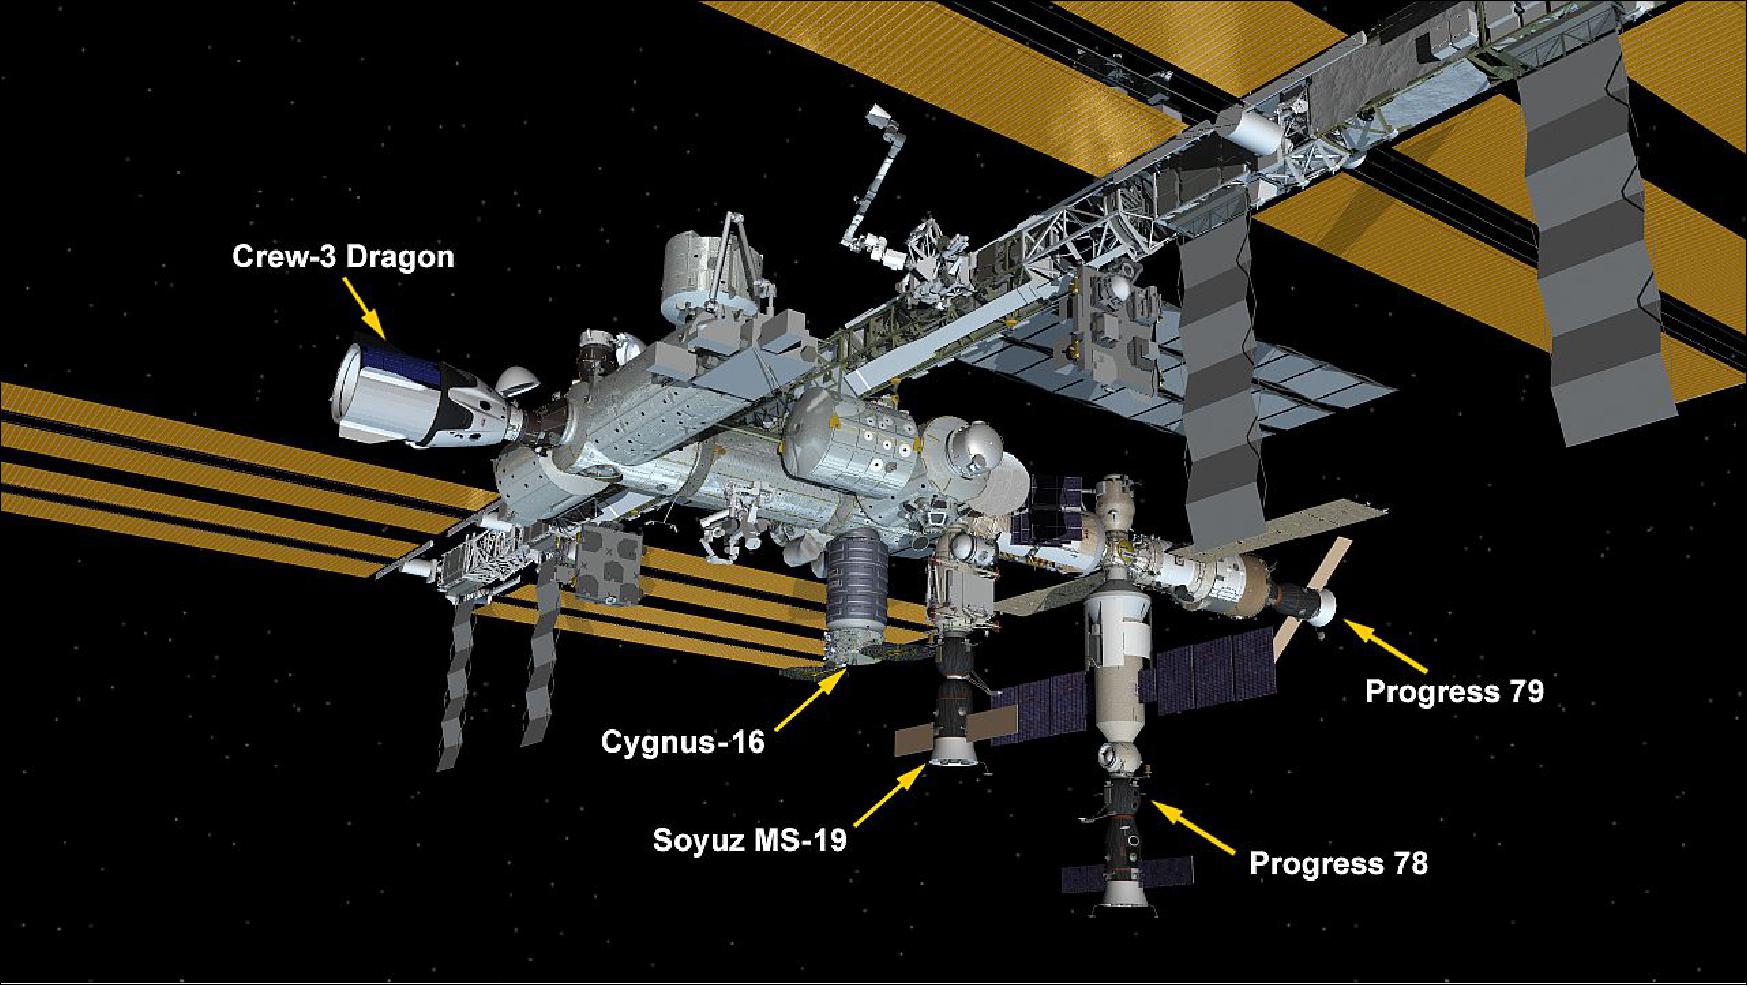 Figure 12: International Space Station Configuration on 11November 2021. Five spaceships are parked at the space station including Northrop Grumman’s Cygnus space freighter; the SpaceX Crew Dragon vehicle; and Russia’s Soyuz MS-19 crew ship and Progress 78 and 79 resupply ships (image credit: NASA)